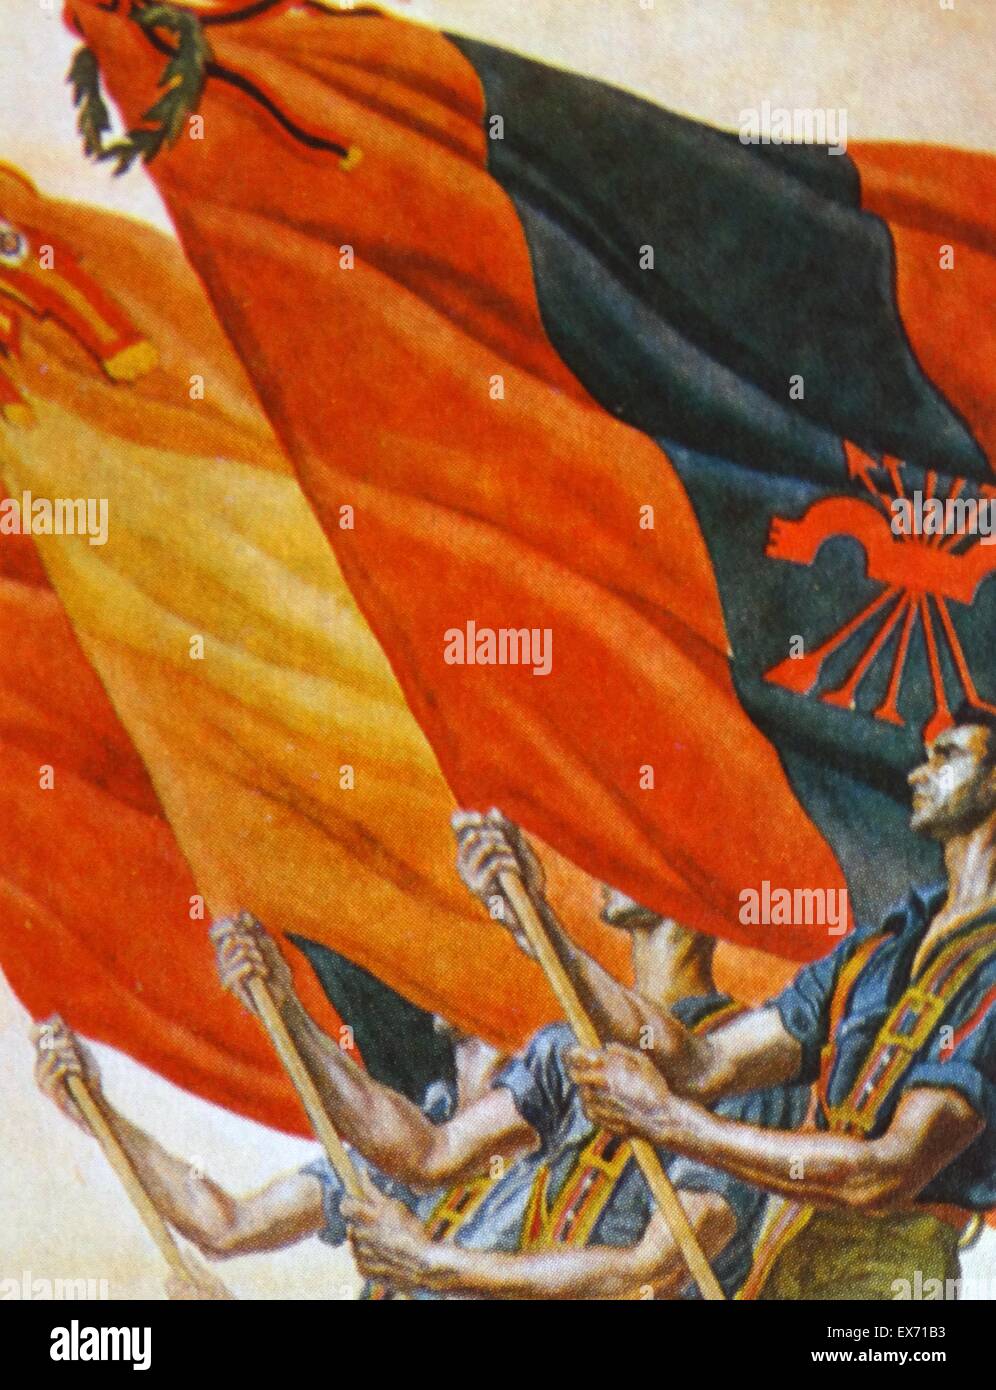 The Fascist flag of the Falange is waved in a Spanish civil war, nationalist propaganda illustration Stock Photo